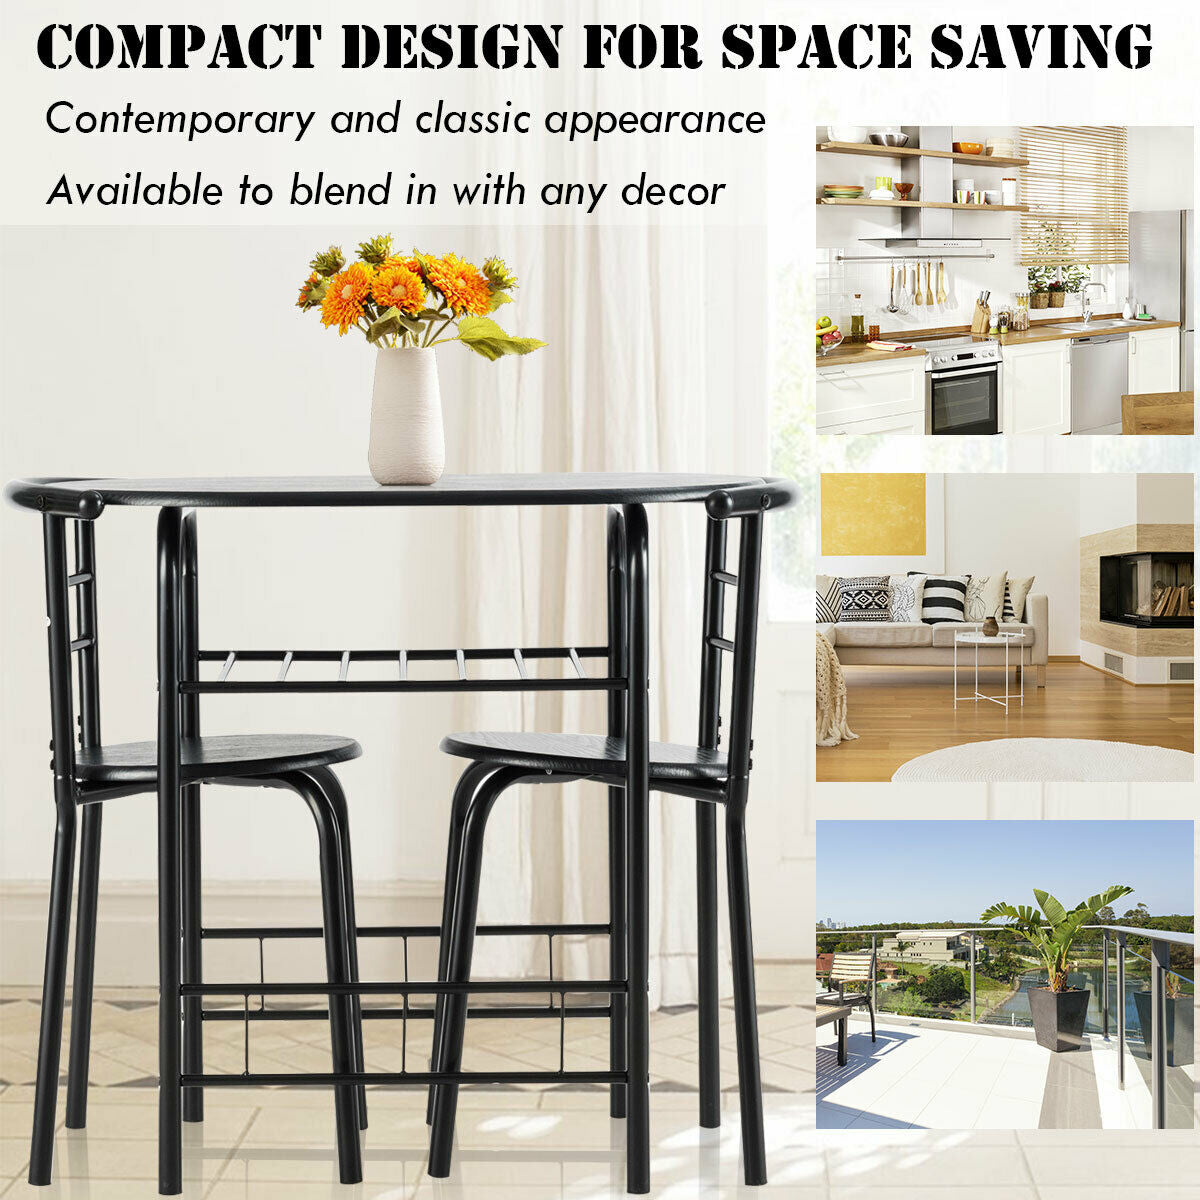 Space-Saving Design: The curved backrests and rounded edges of the tabletop allow the two chairs to neatly tuck under the table when not in use. This dining set is an excellent space-saving solution, particularly suitable for compact areas such as apartments, kitchens, or dining rooms.